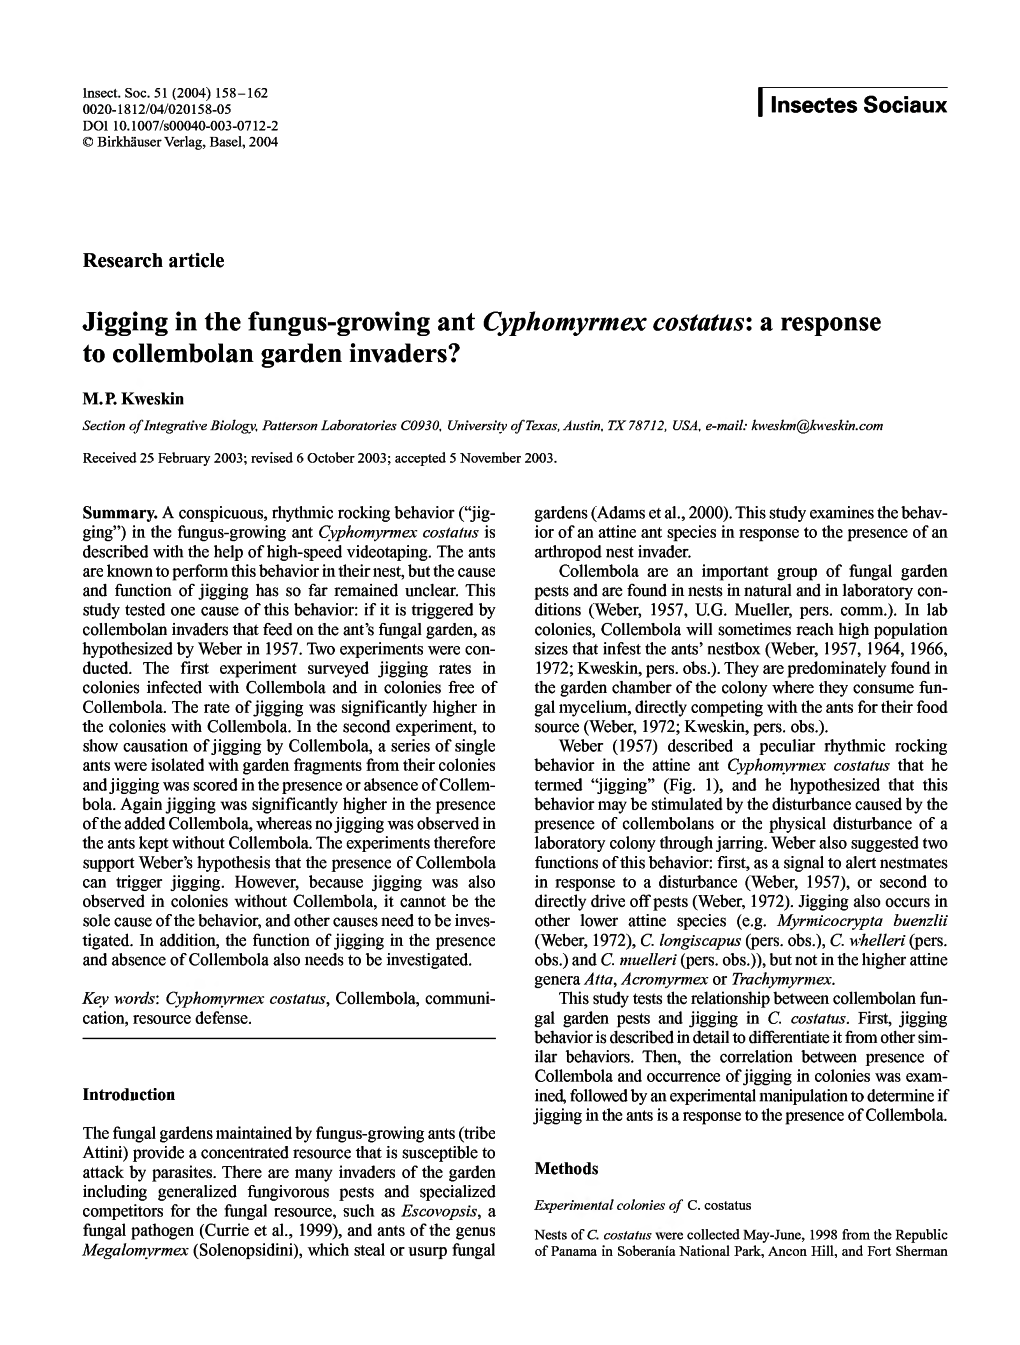 Jigging in the Fungus-Growing Ant Cyphomyrmex Costatus: a Response to Collembolan Garden Invaders?